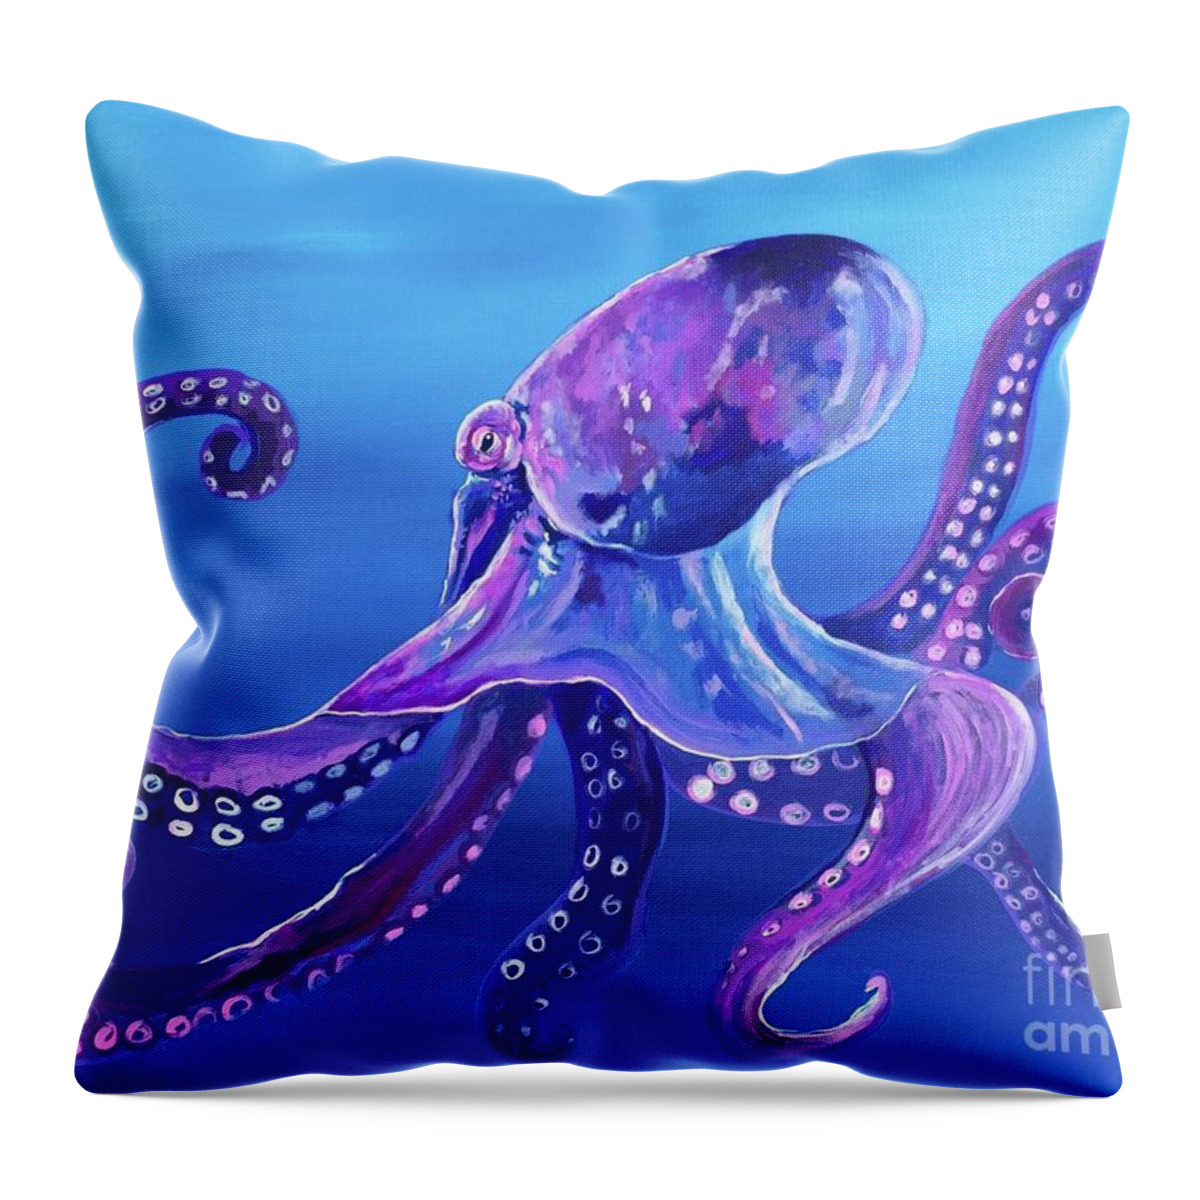 Octopus Throw Pillow featuring the painting Octopus by Kim Heil